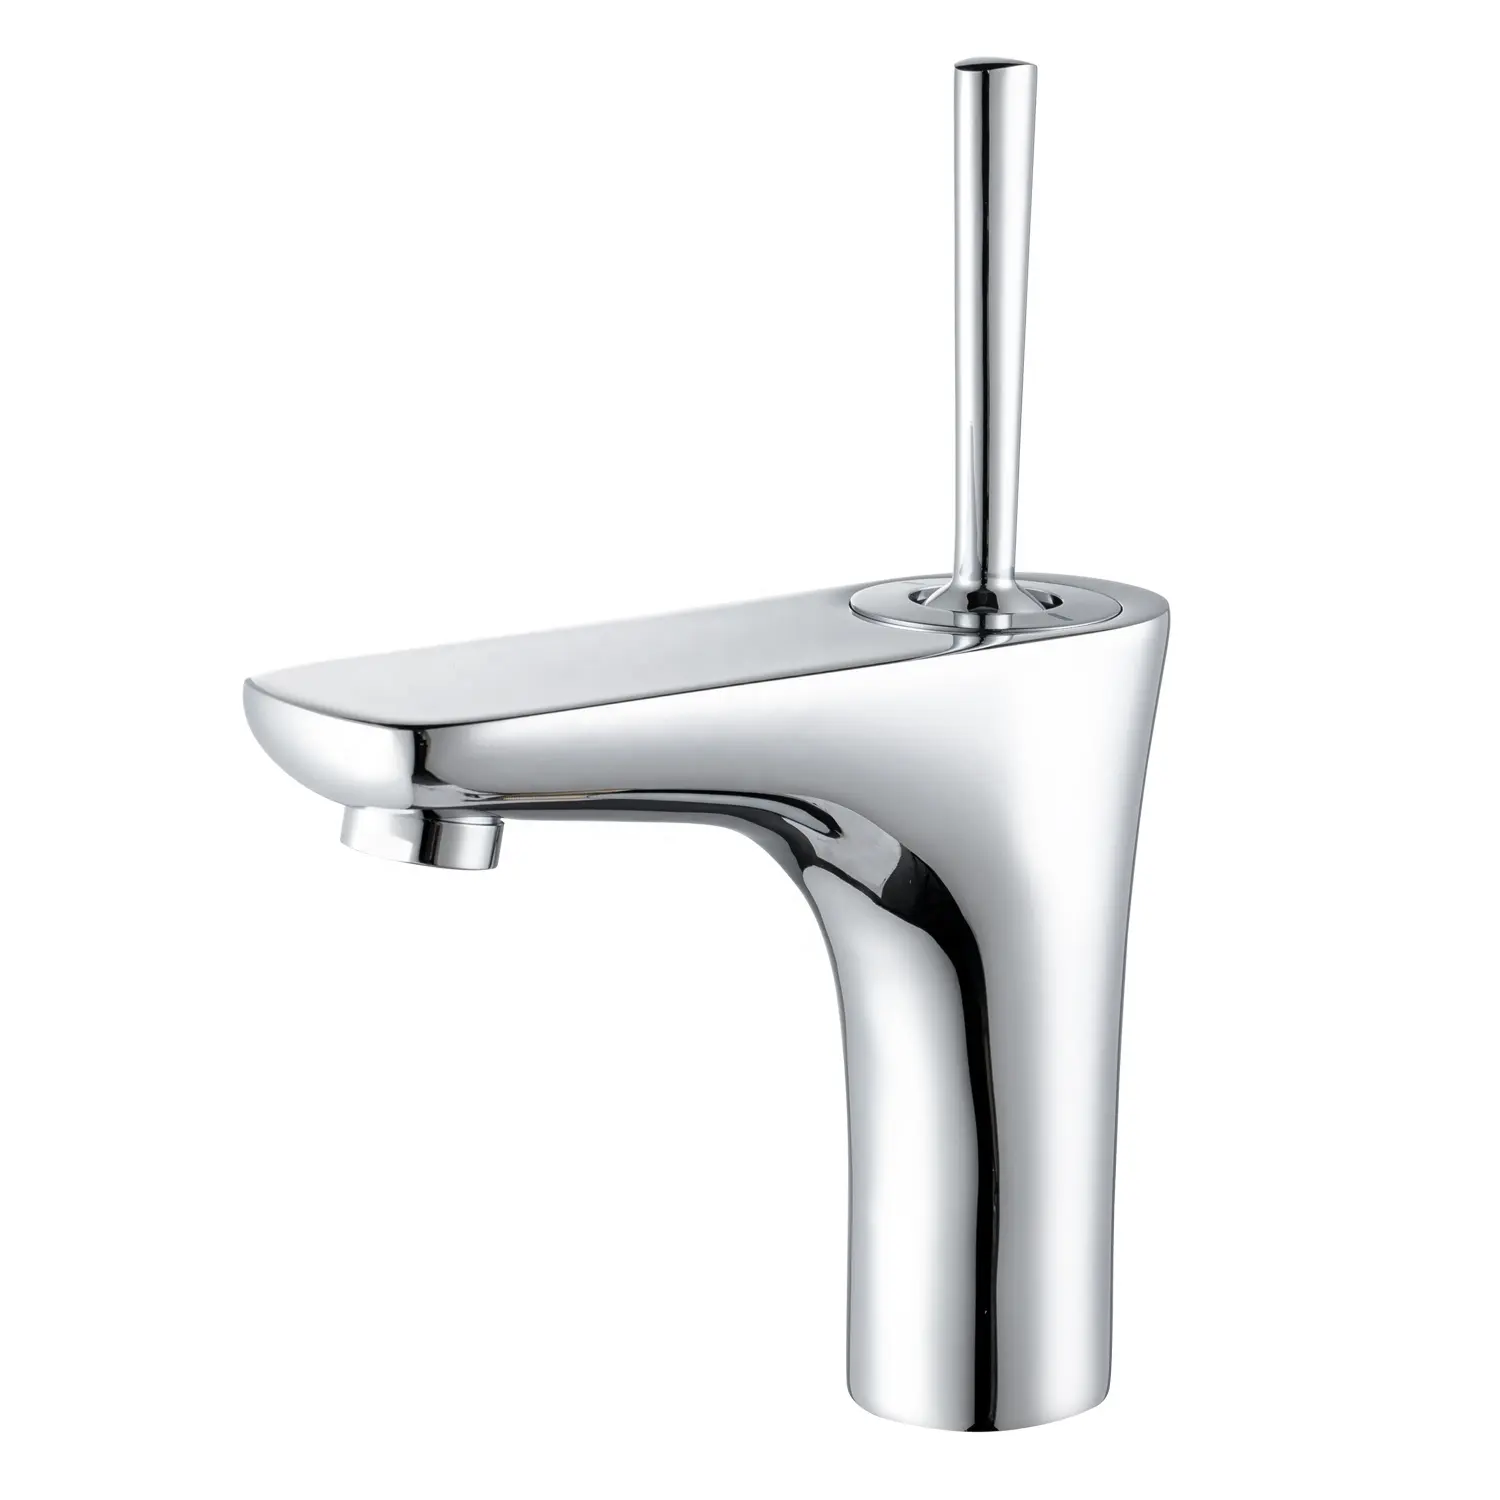 TB-3054 Cold/hot Water High Quality Sprayer Kitchen Sink Accessories Bathroom Mixer Tap Basin Faucets Deck Mounted